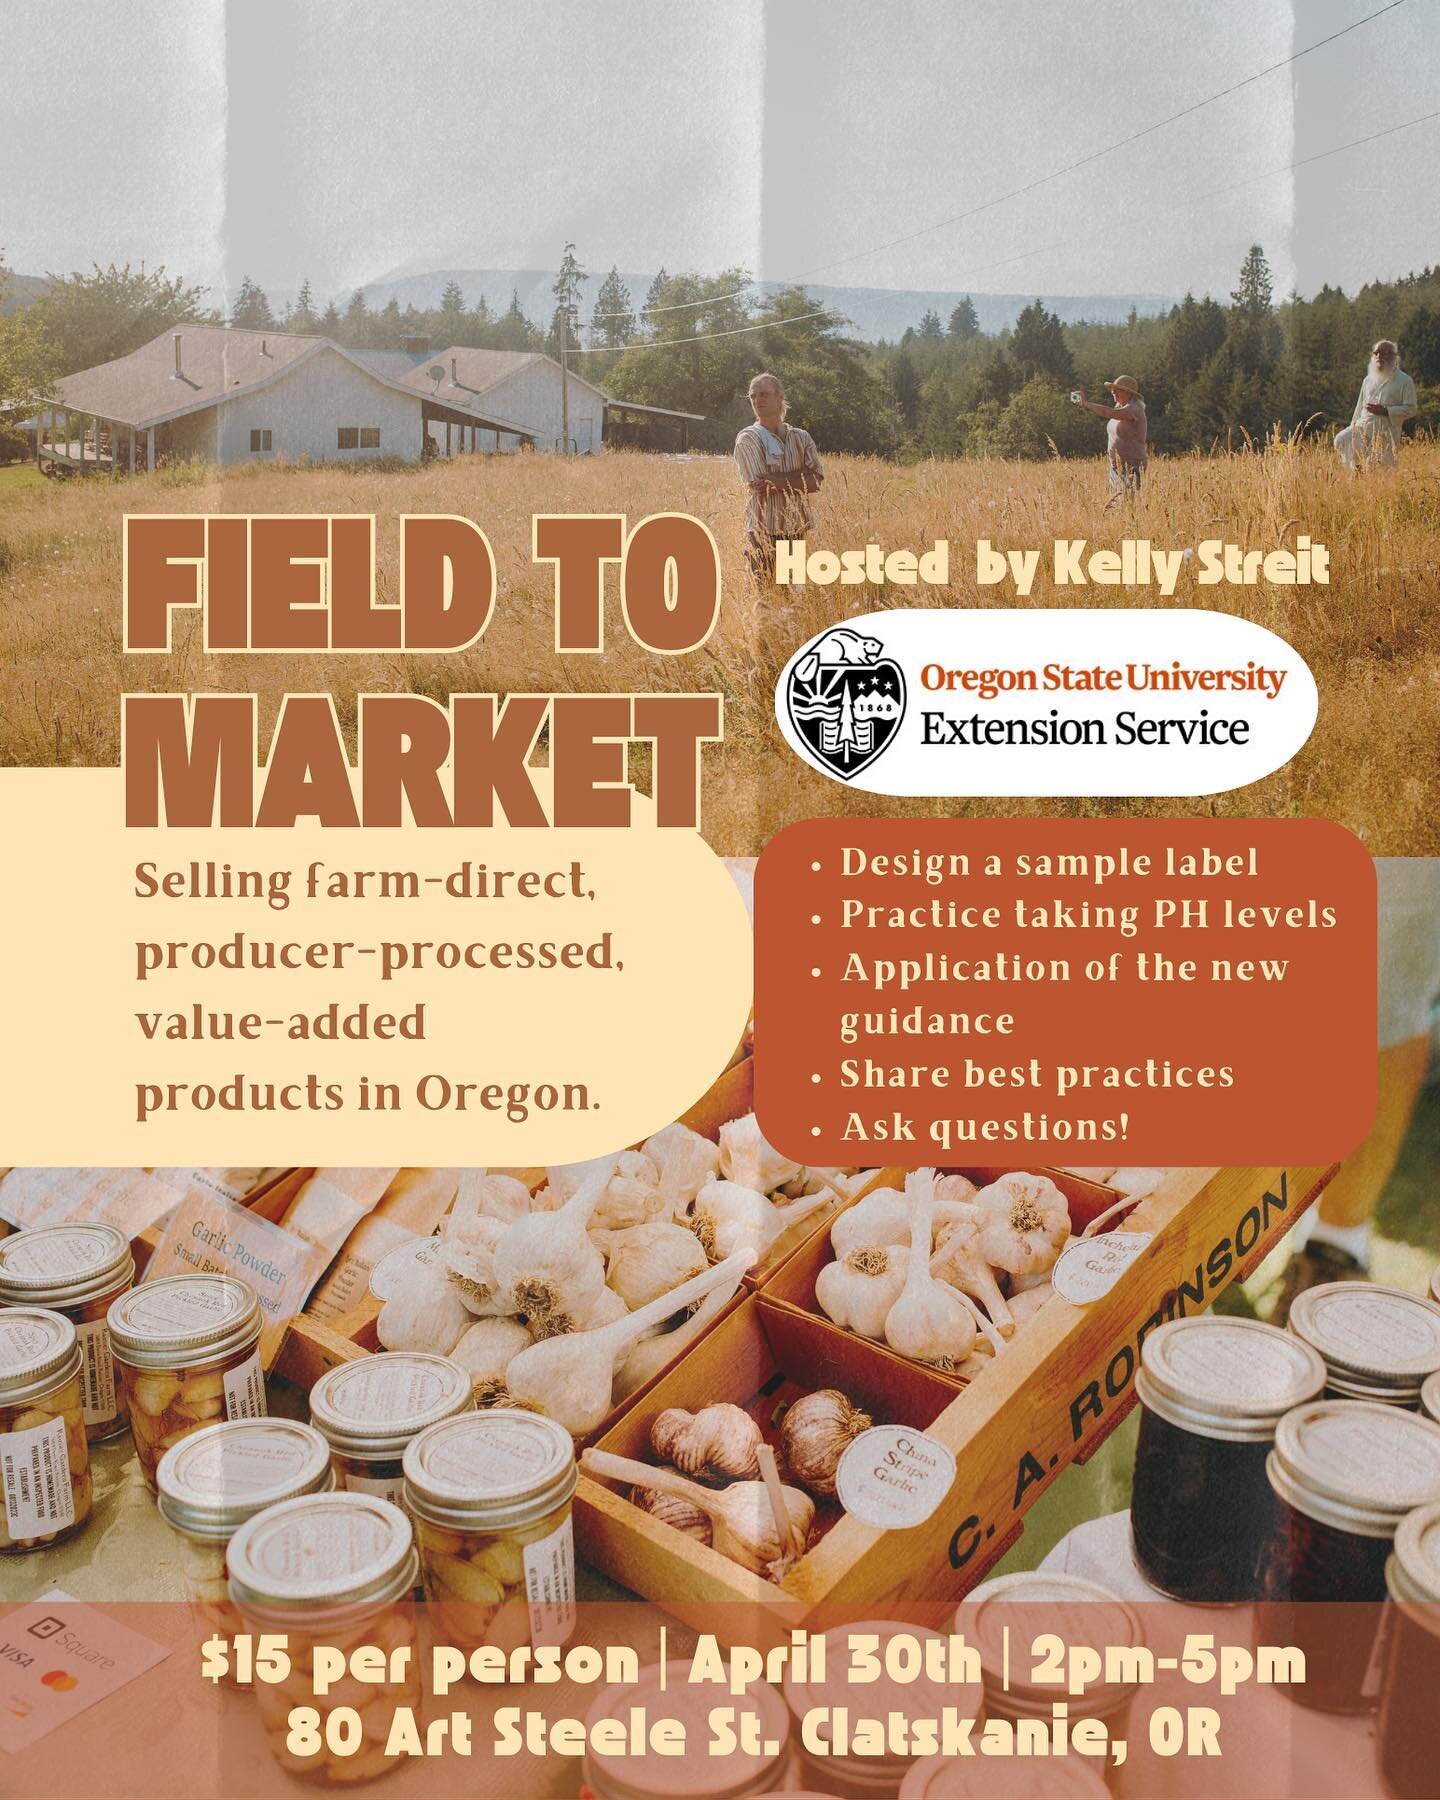 This in depth Field-to-Market course on Oregon Farm Direct Laws taught by OSU Extensions instructor, Kelly Streit, is live! 

This course is for any gardener or farmer that would like to produce and sell value-added, producer-processed products under